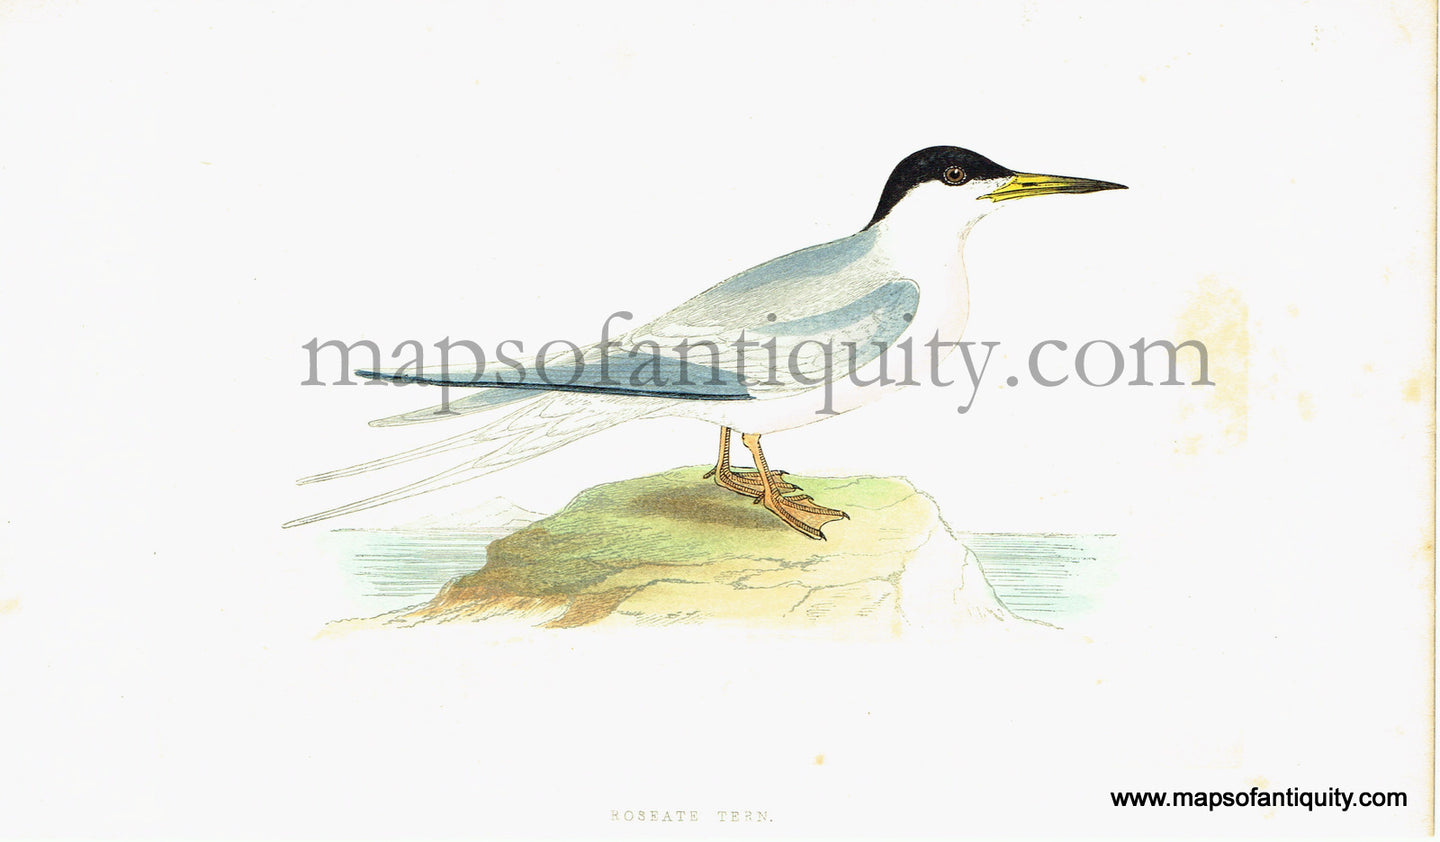 Antique-Hand-Colored-Engraved-Illustration-Roseate-Tern-Antique-Prints-Natural-History-Birds-c.-1860-Morris-Maps-Of-Antiquity